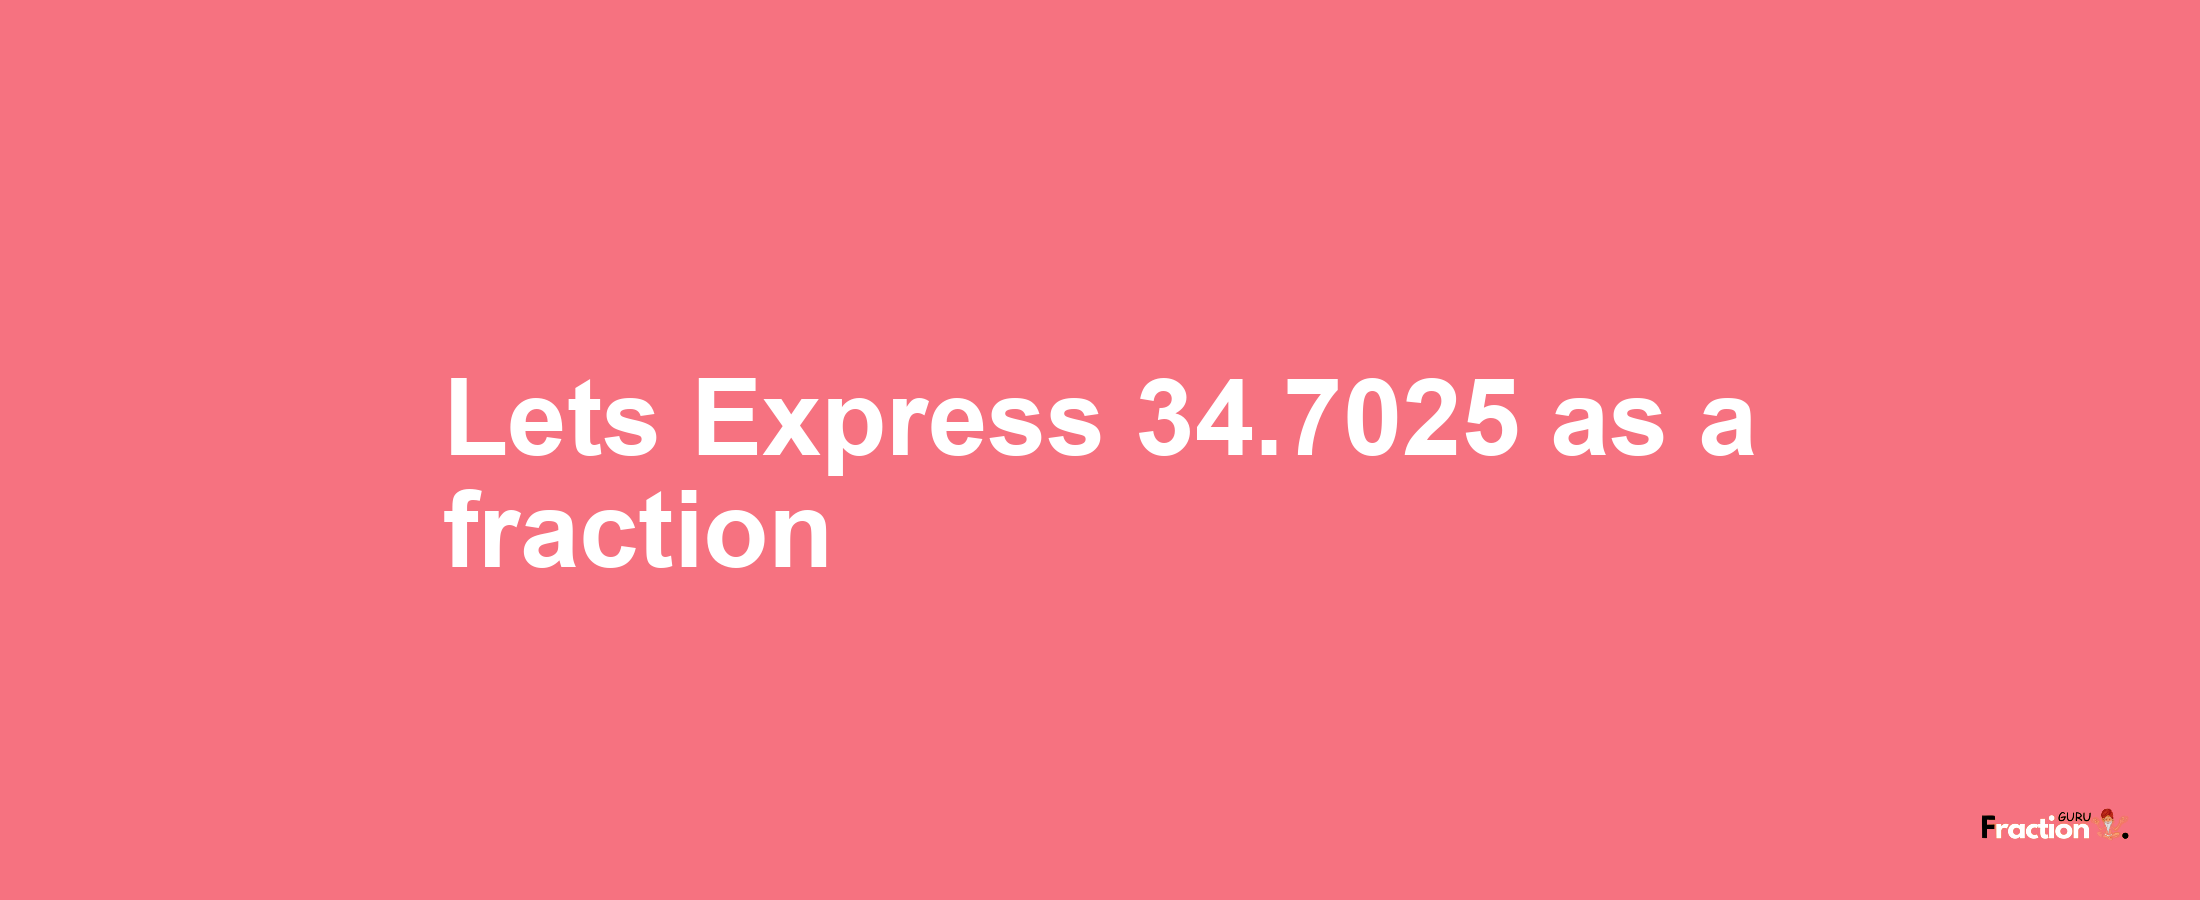 Lets Express 34.7025 as afraction